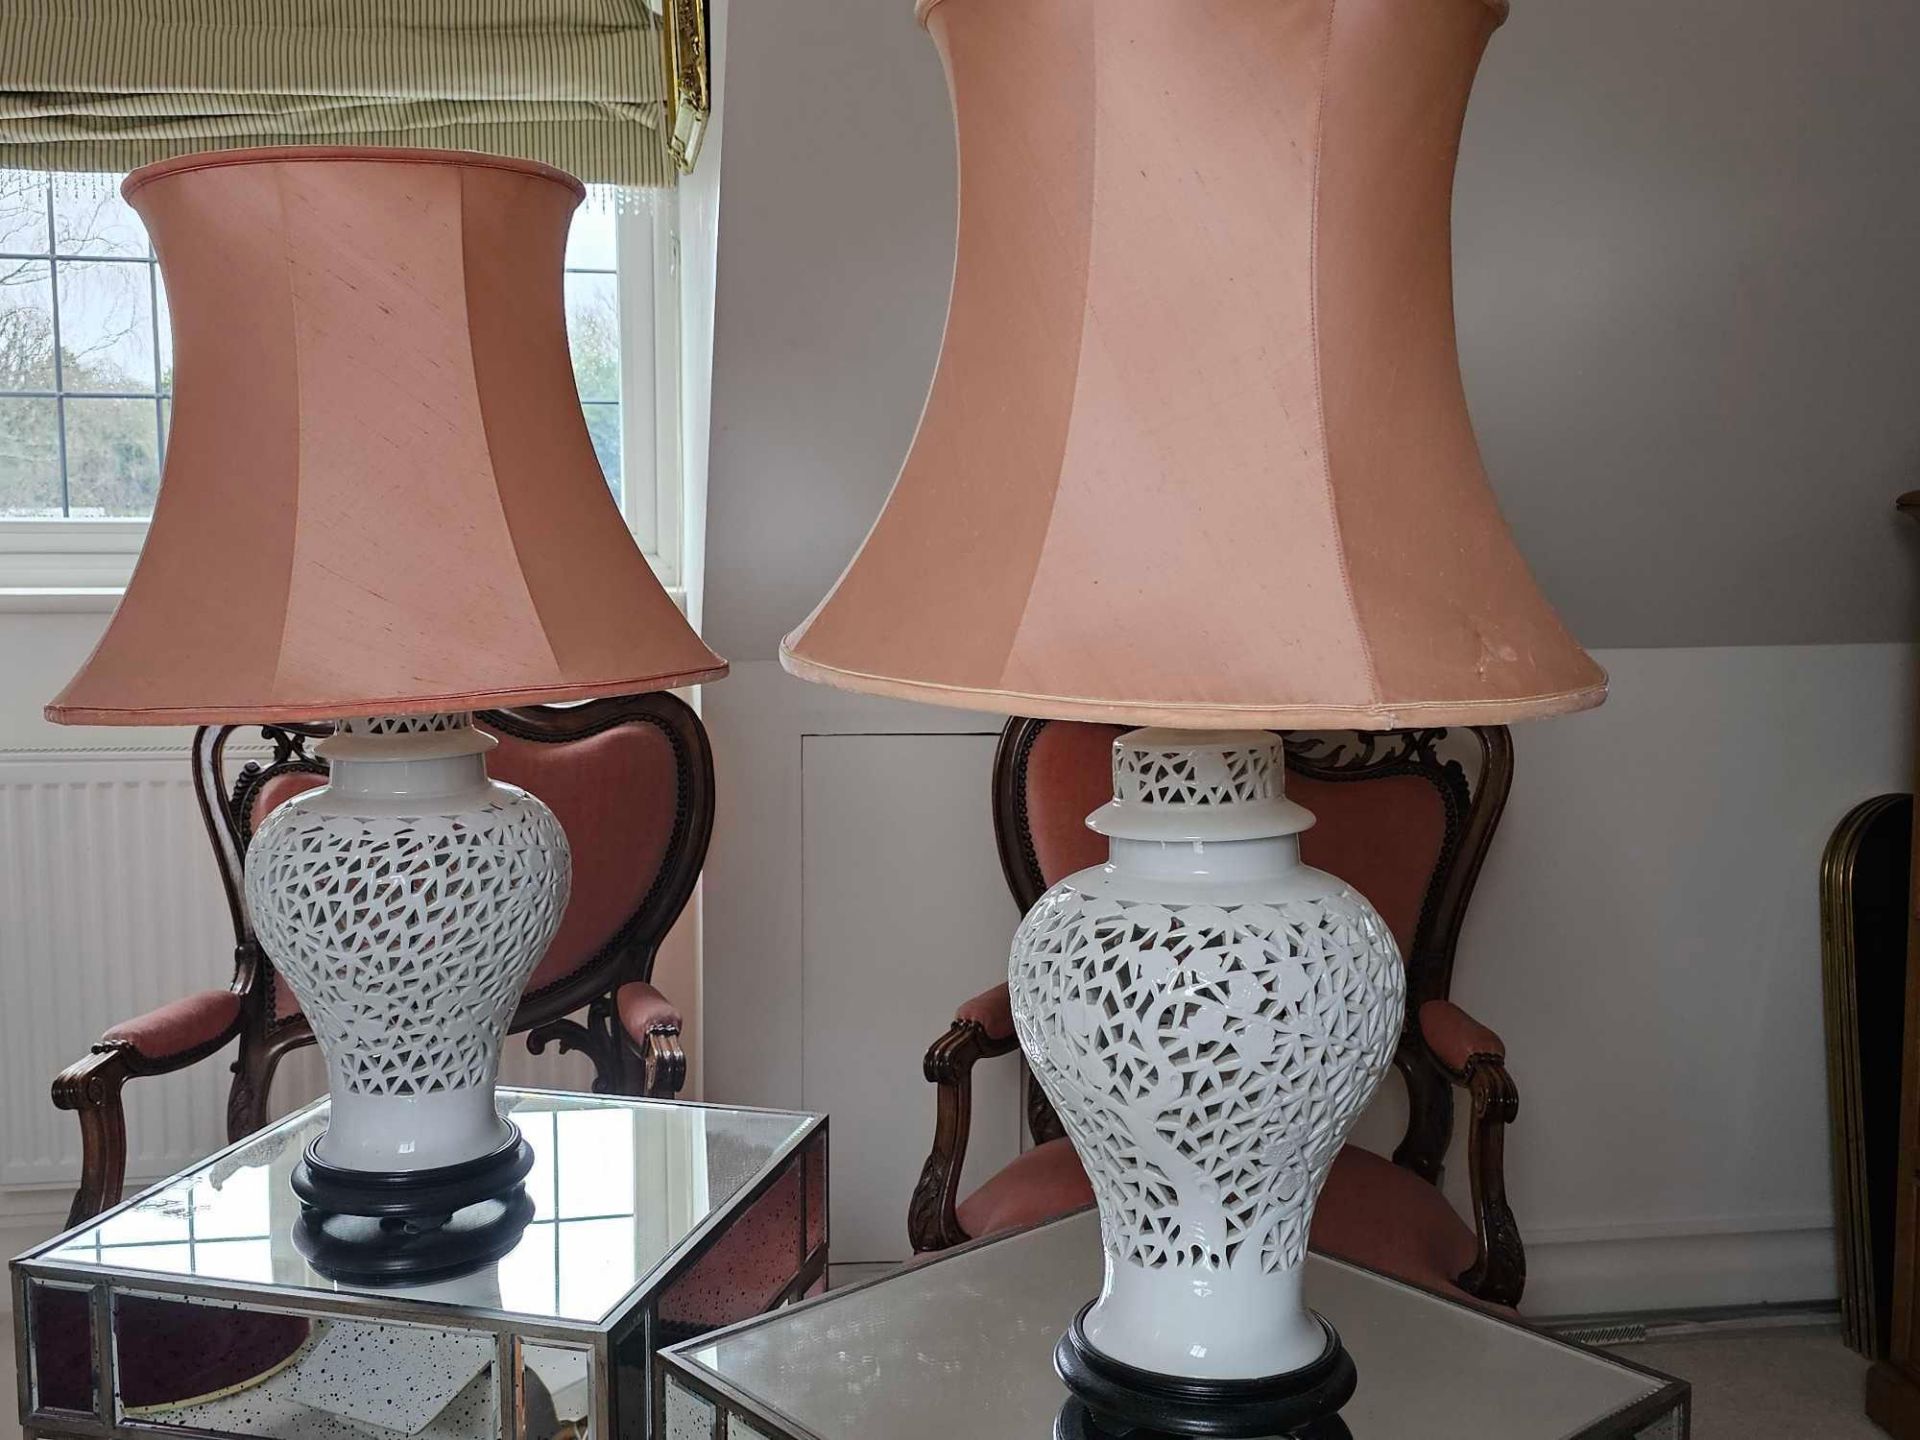 A Pair Of Blanc De Chine Table Lamp Pierced Body In The Form Of Cherry Blossom Porcelain With Shades - Image 2 of 3